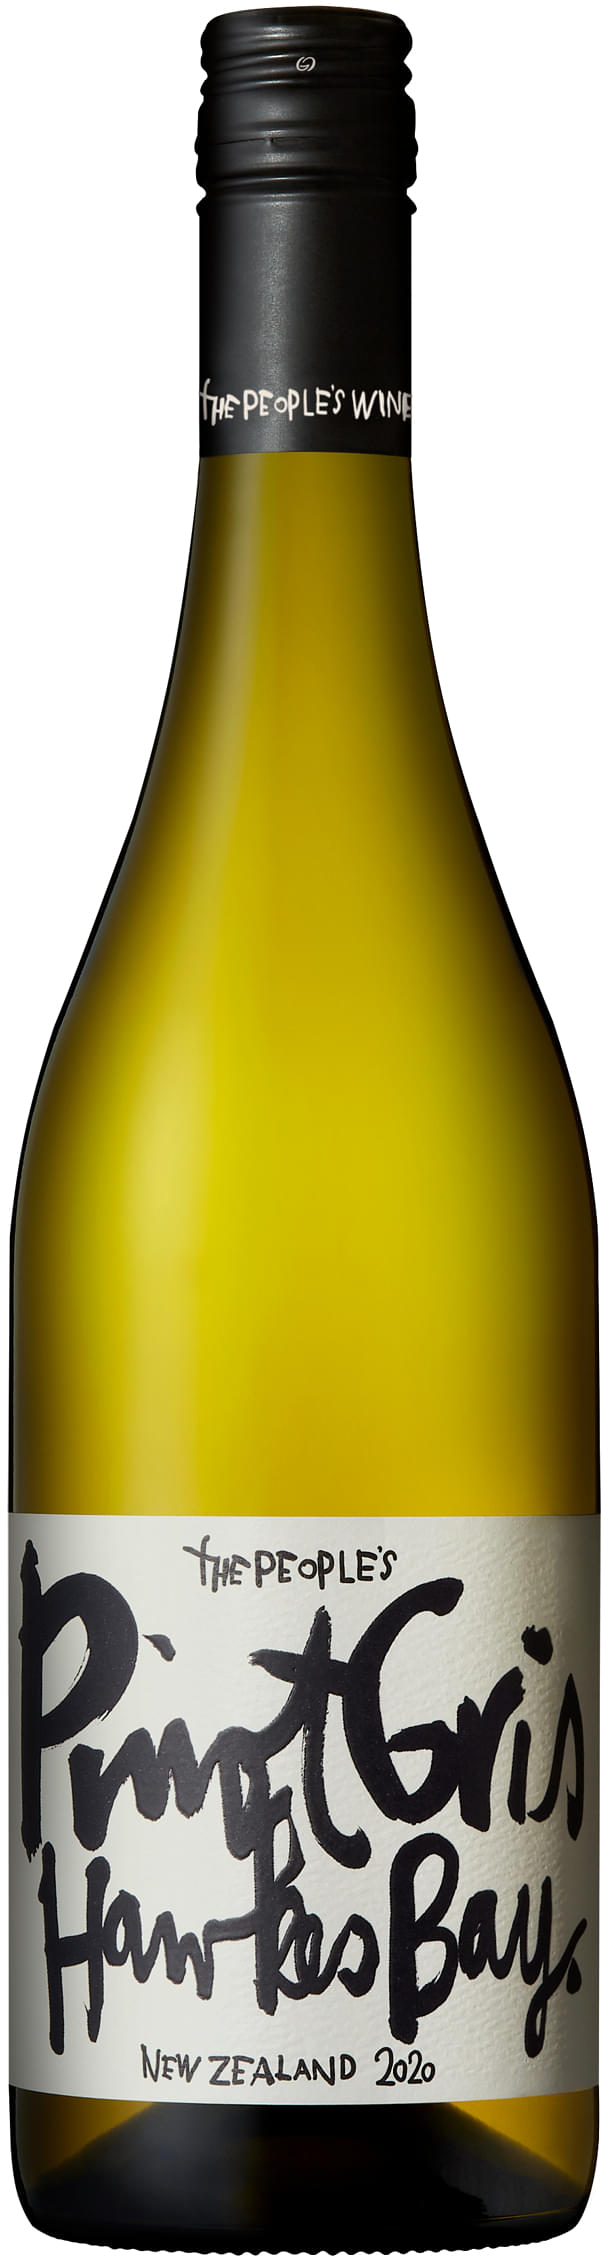 The People's Pinot Gris